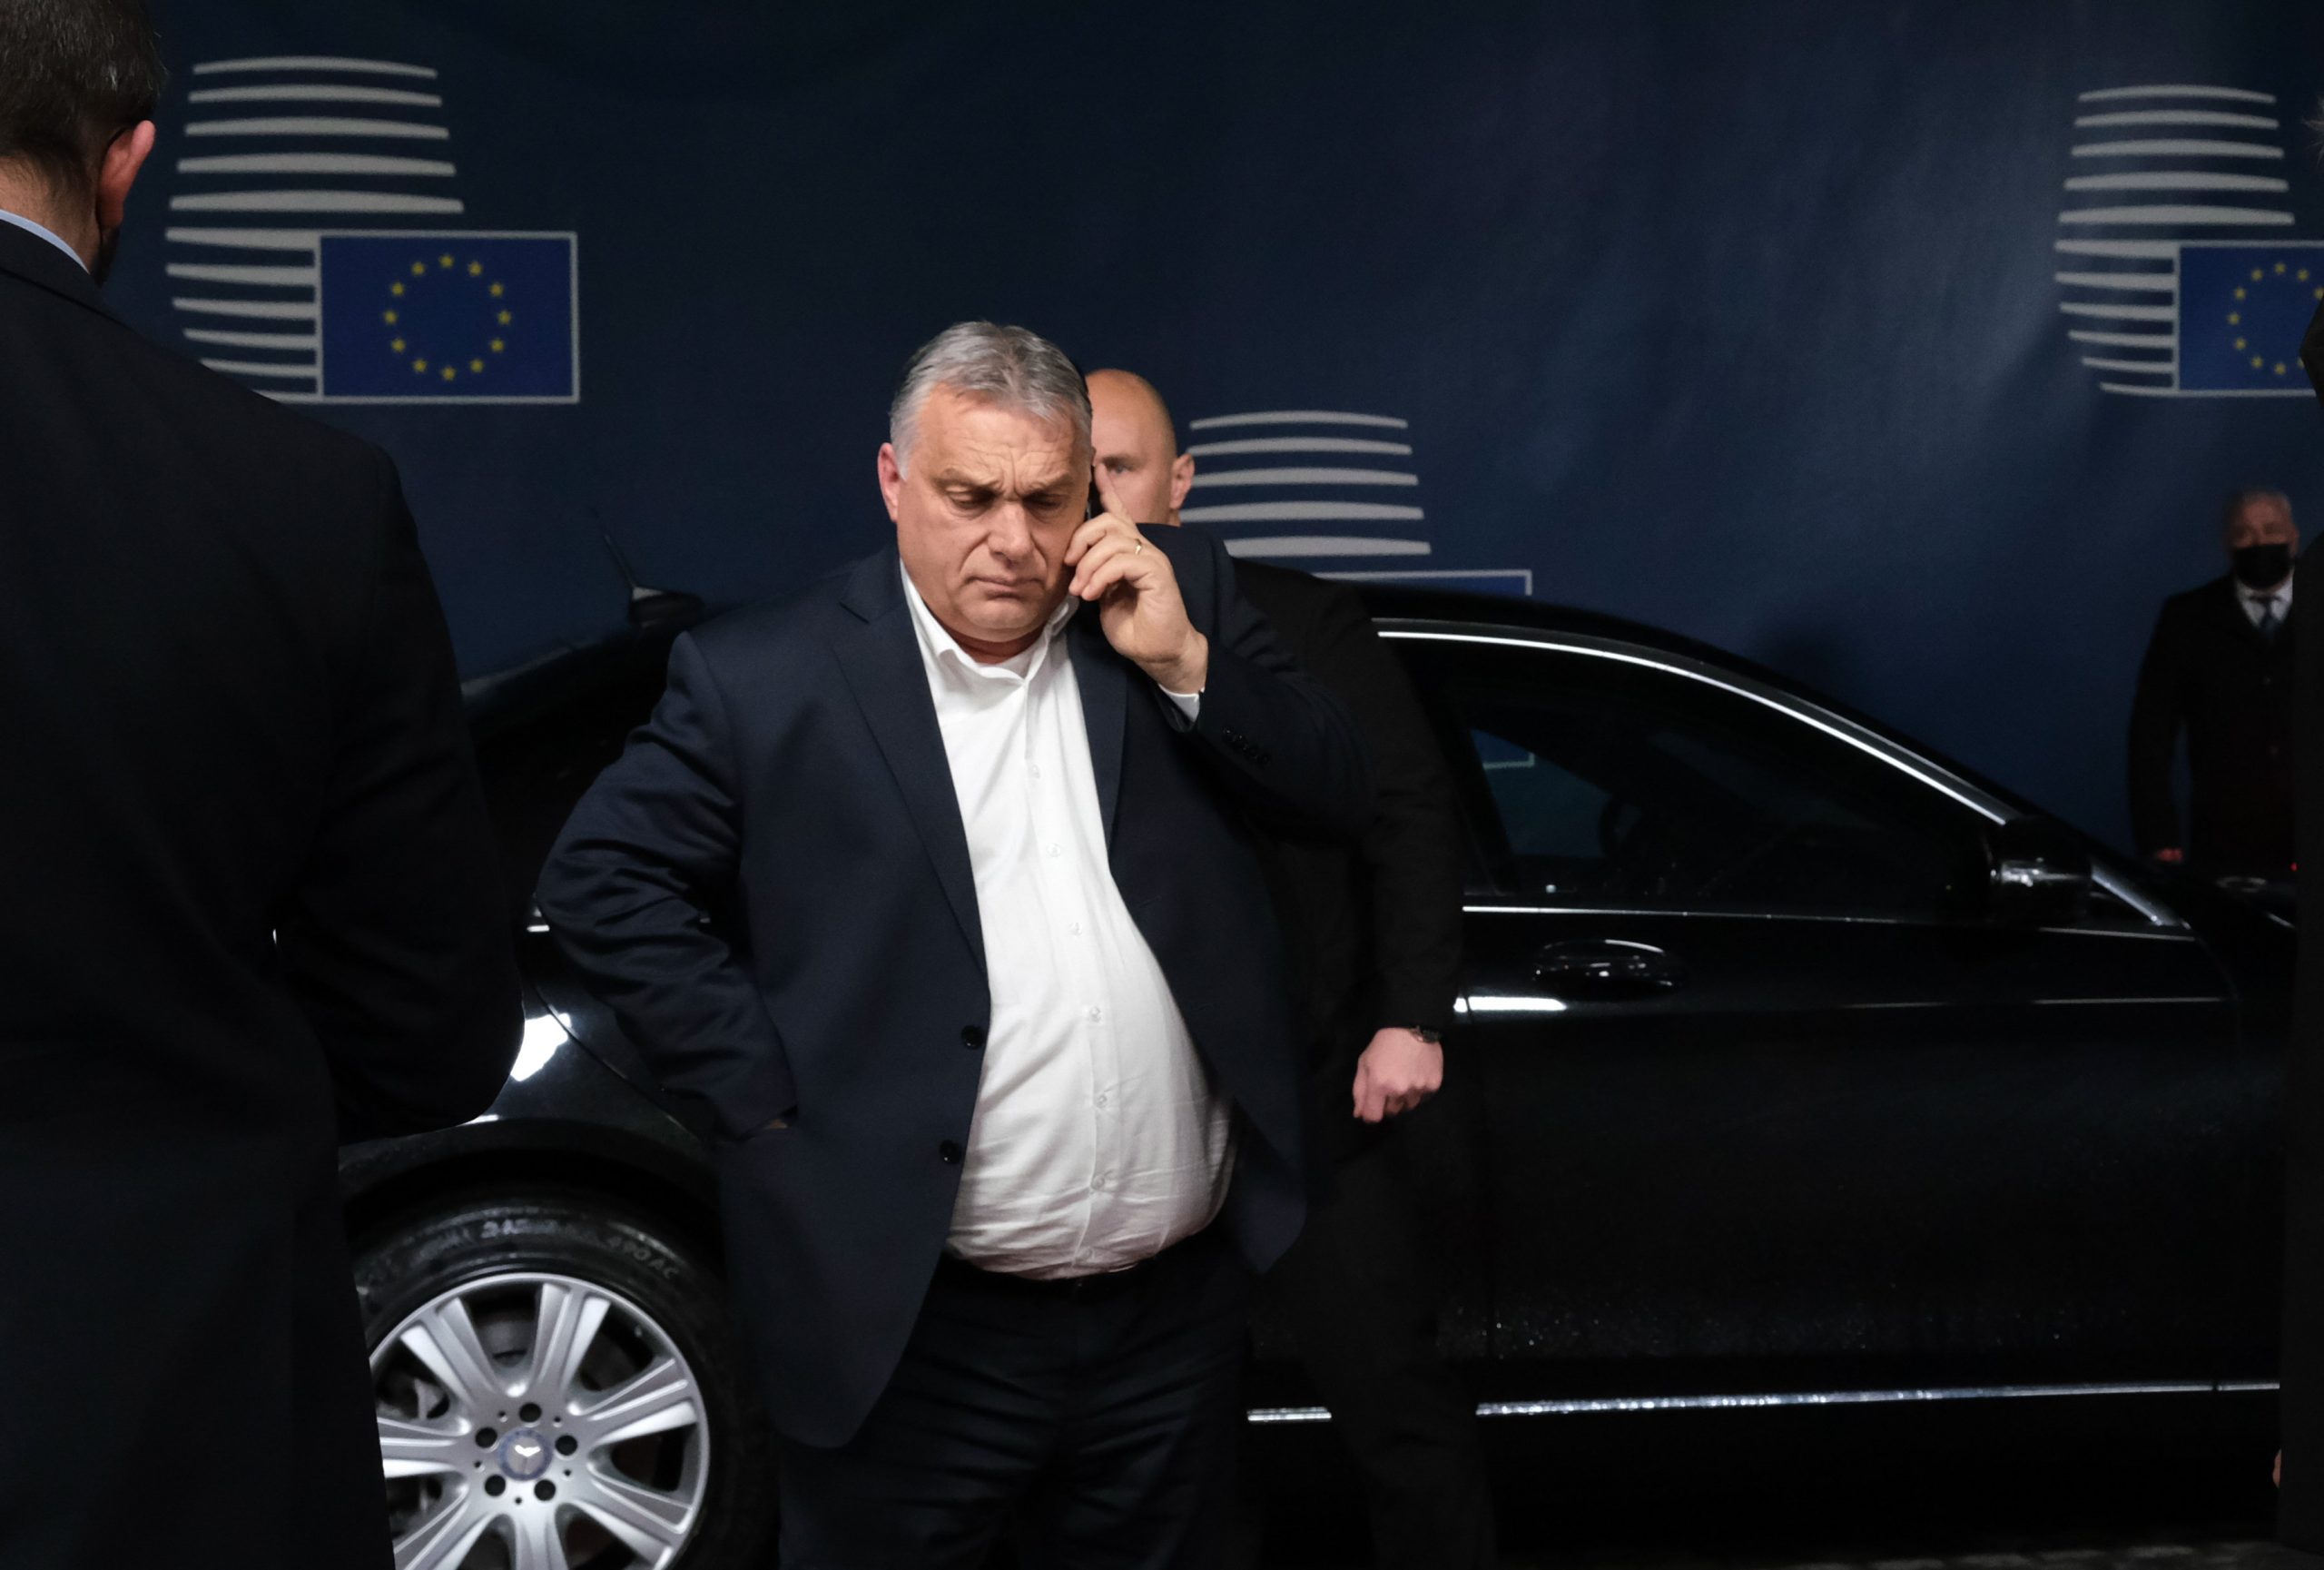 EU Summit on Ukraine Crisis  - Orbán: 'We won't let Hungary be plunged into war'